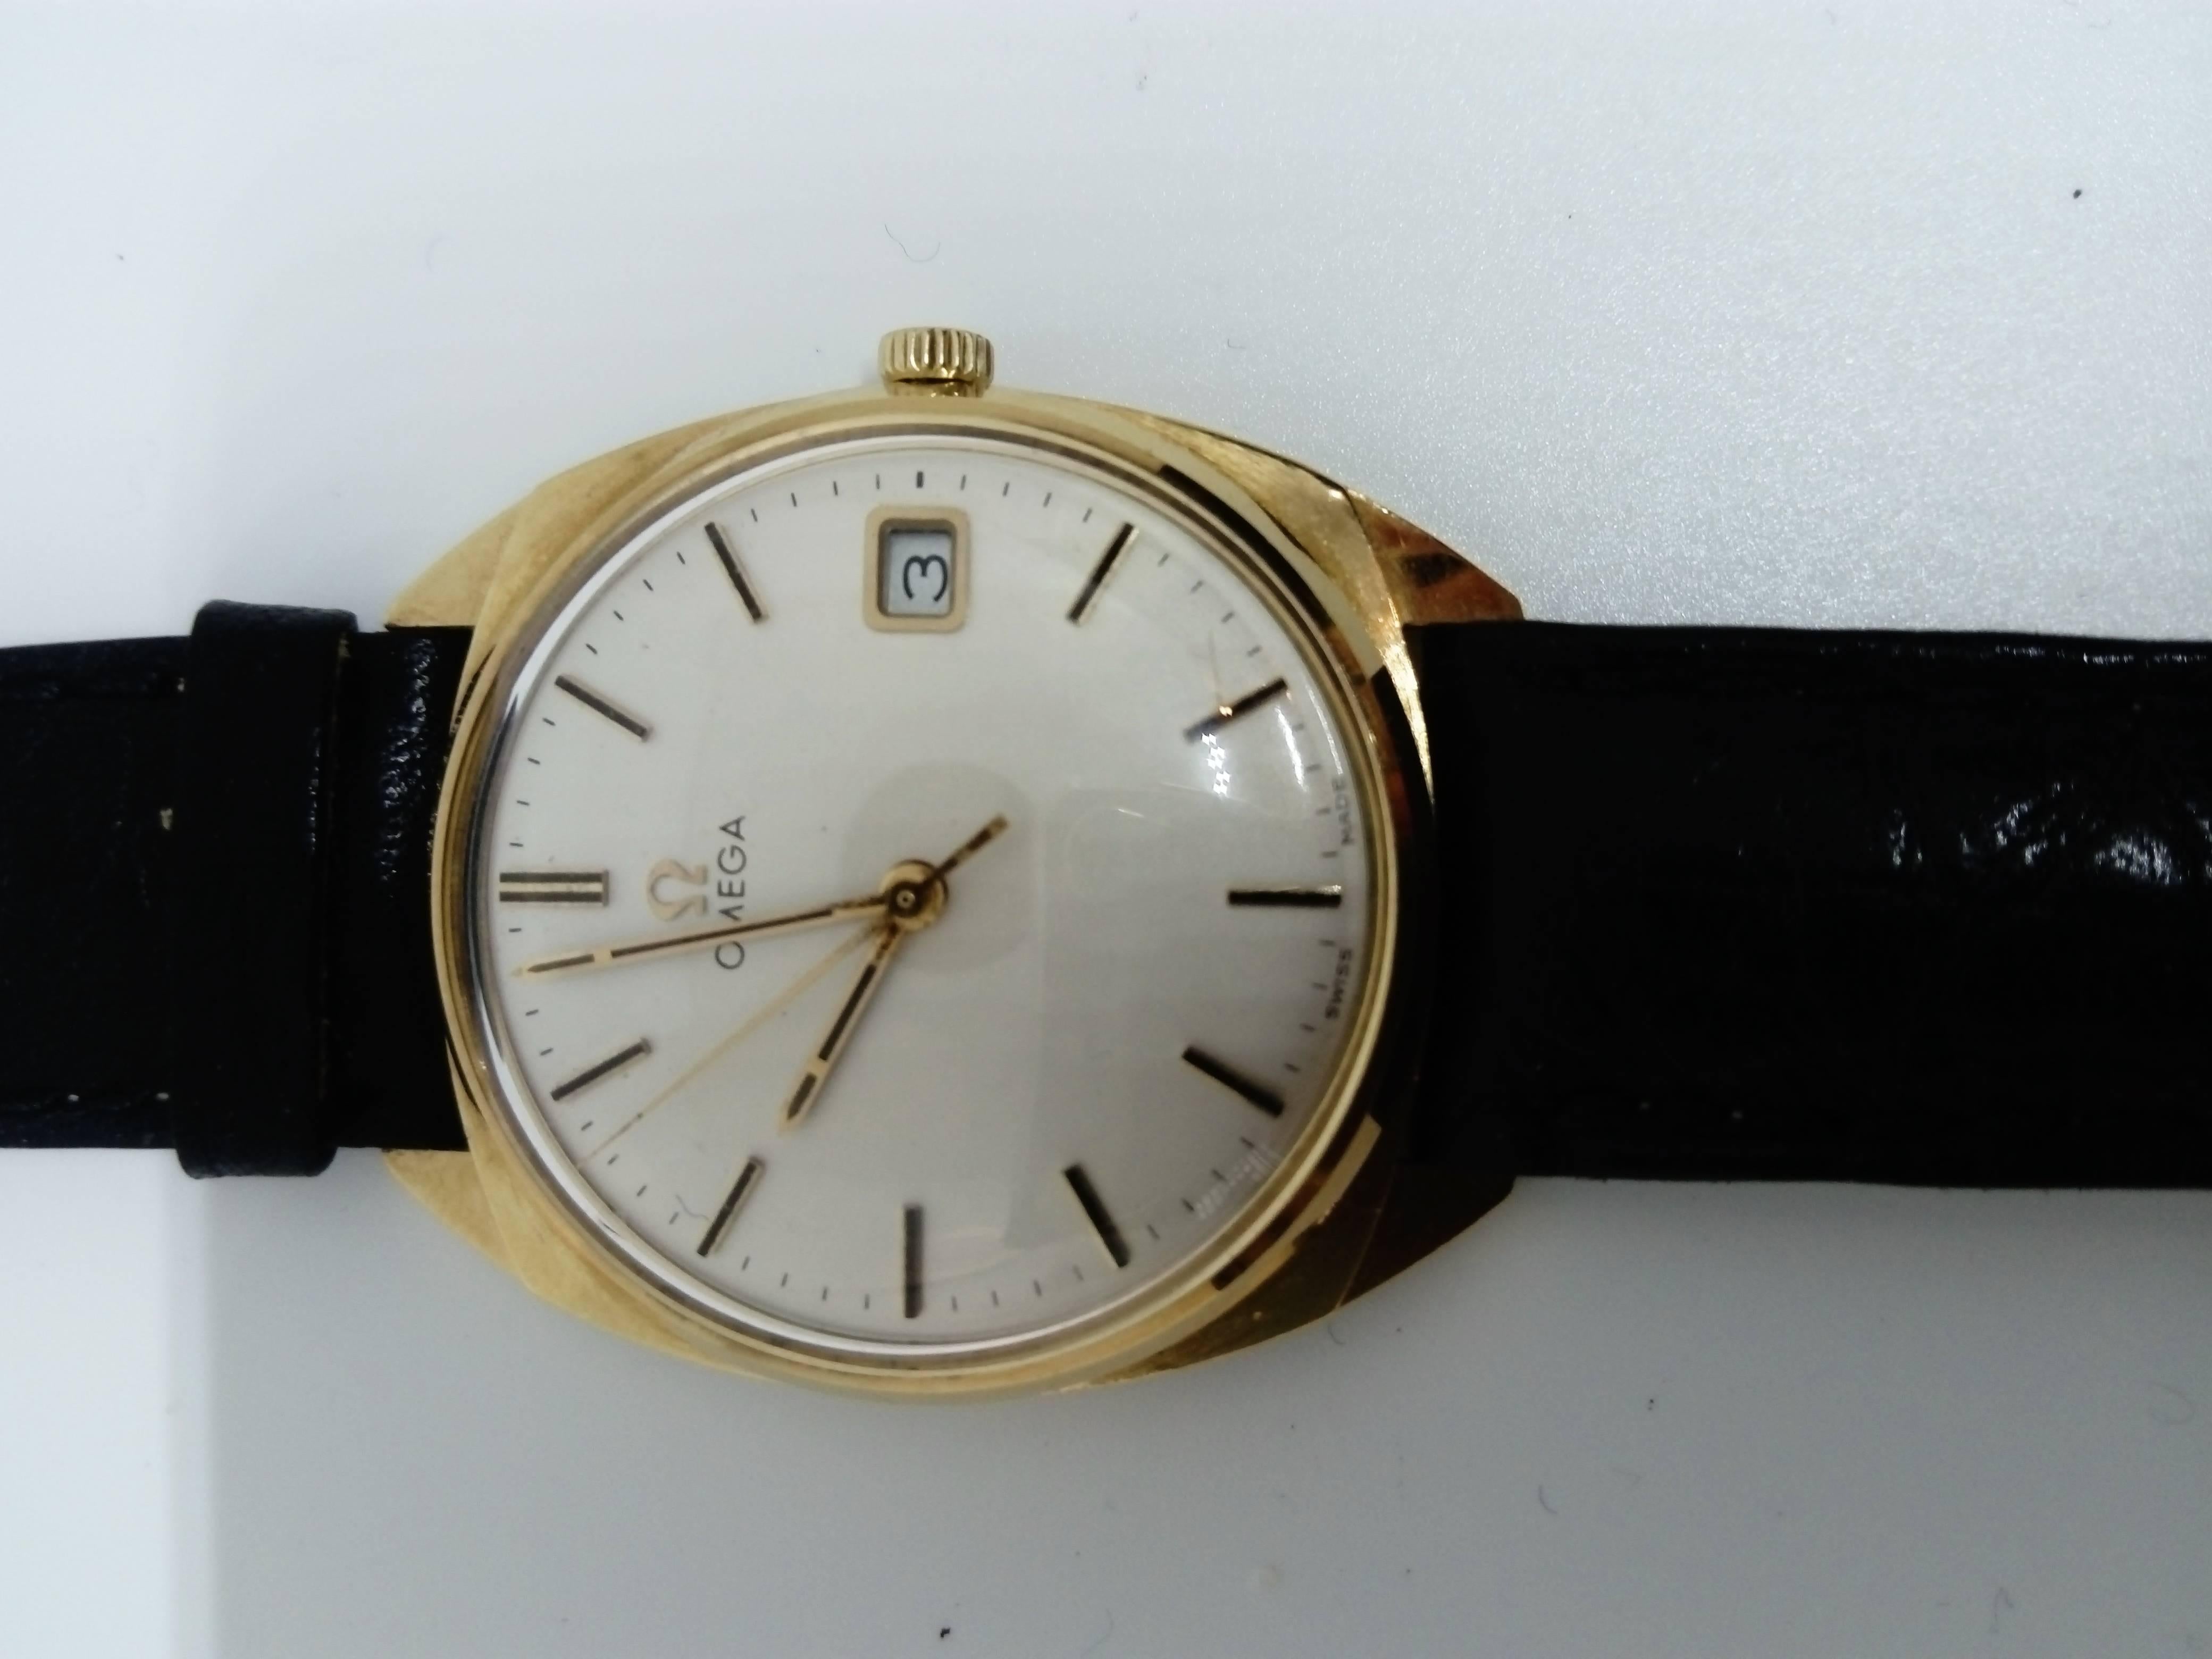 Omega
Classic
Mechanical (date 3h)
OR 18 carat
36 mm diameter
1 year warranty
Very good condition